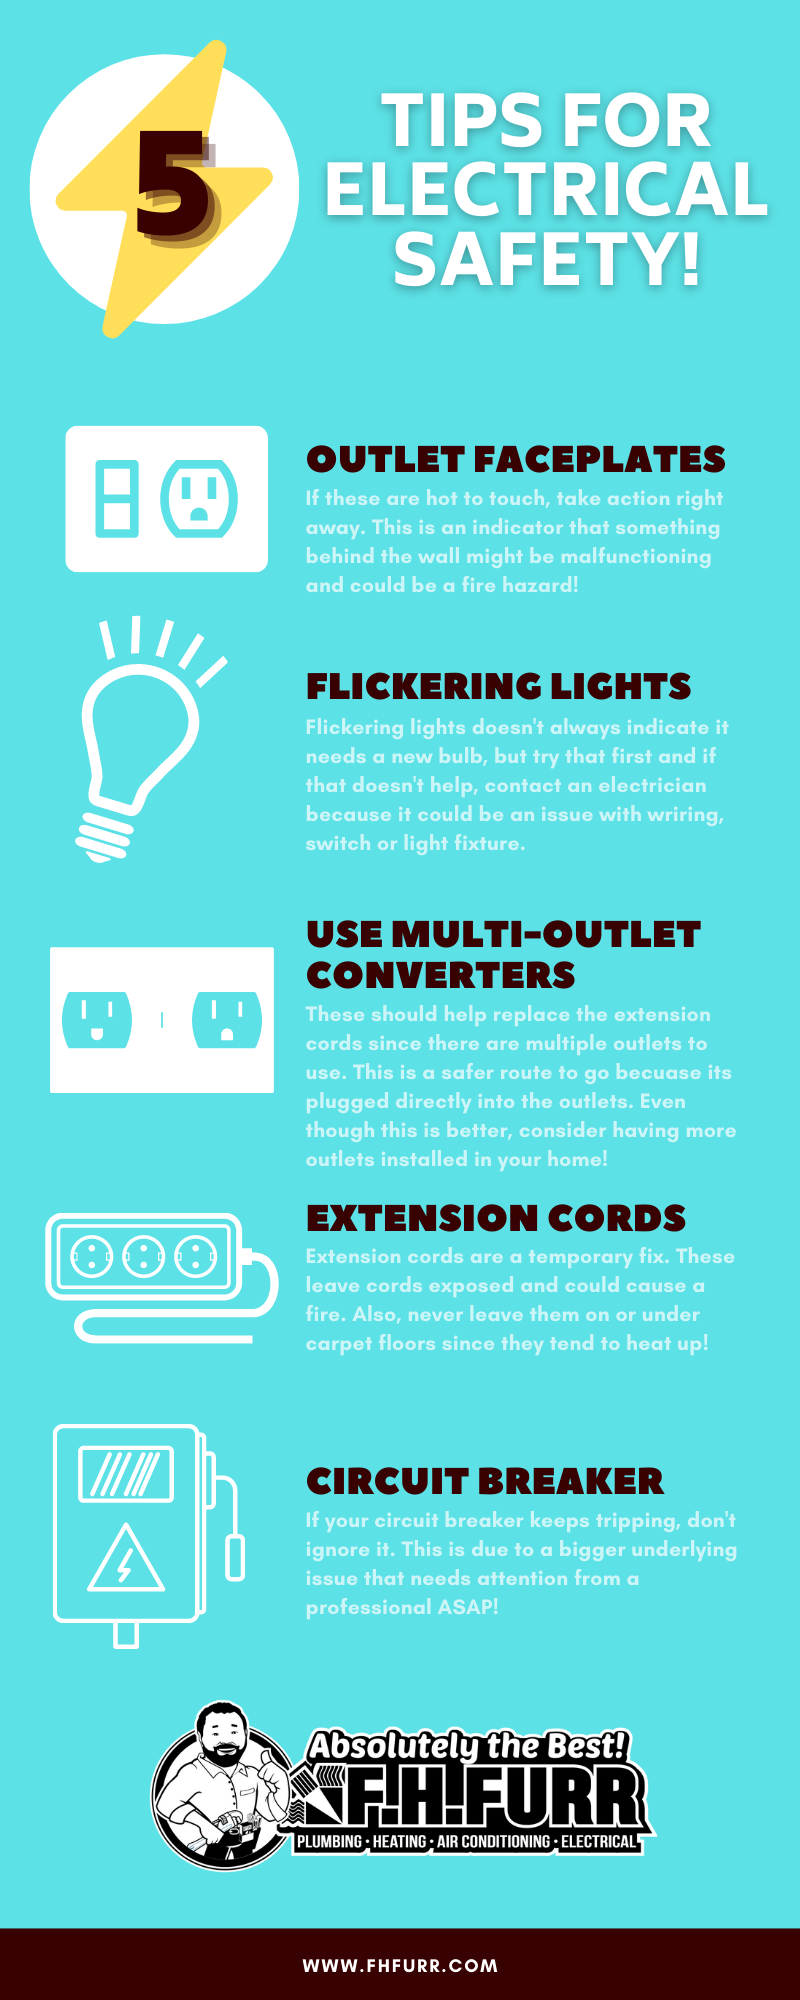 Graphic titled "Tips for Electrical Safety." The tips include addressing outlets that are hot to the touch, resolving issues with flickering lights, using multi-outlet converters, avoiding using too many extension cords, and scheduling services for your circuit breaker if it trips frequently.